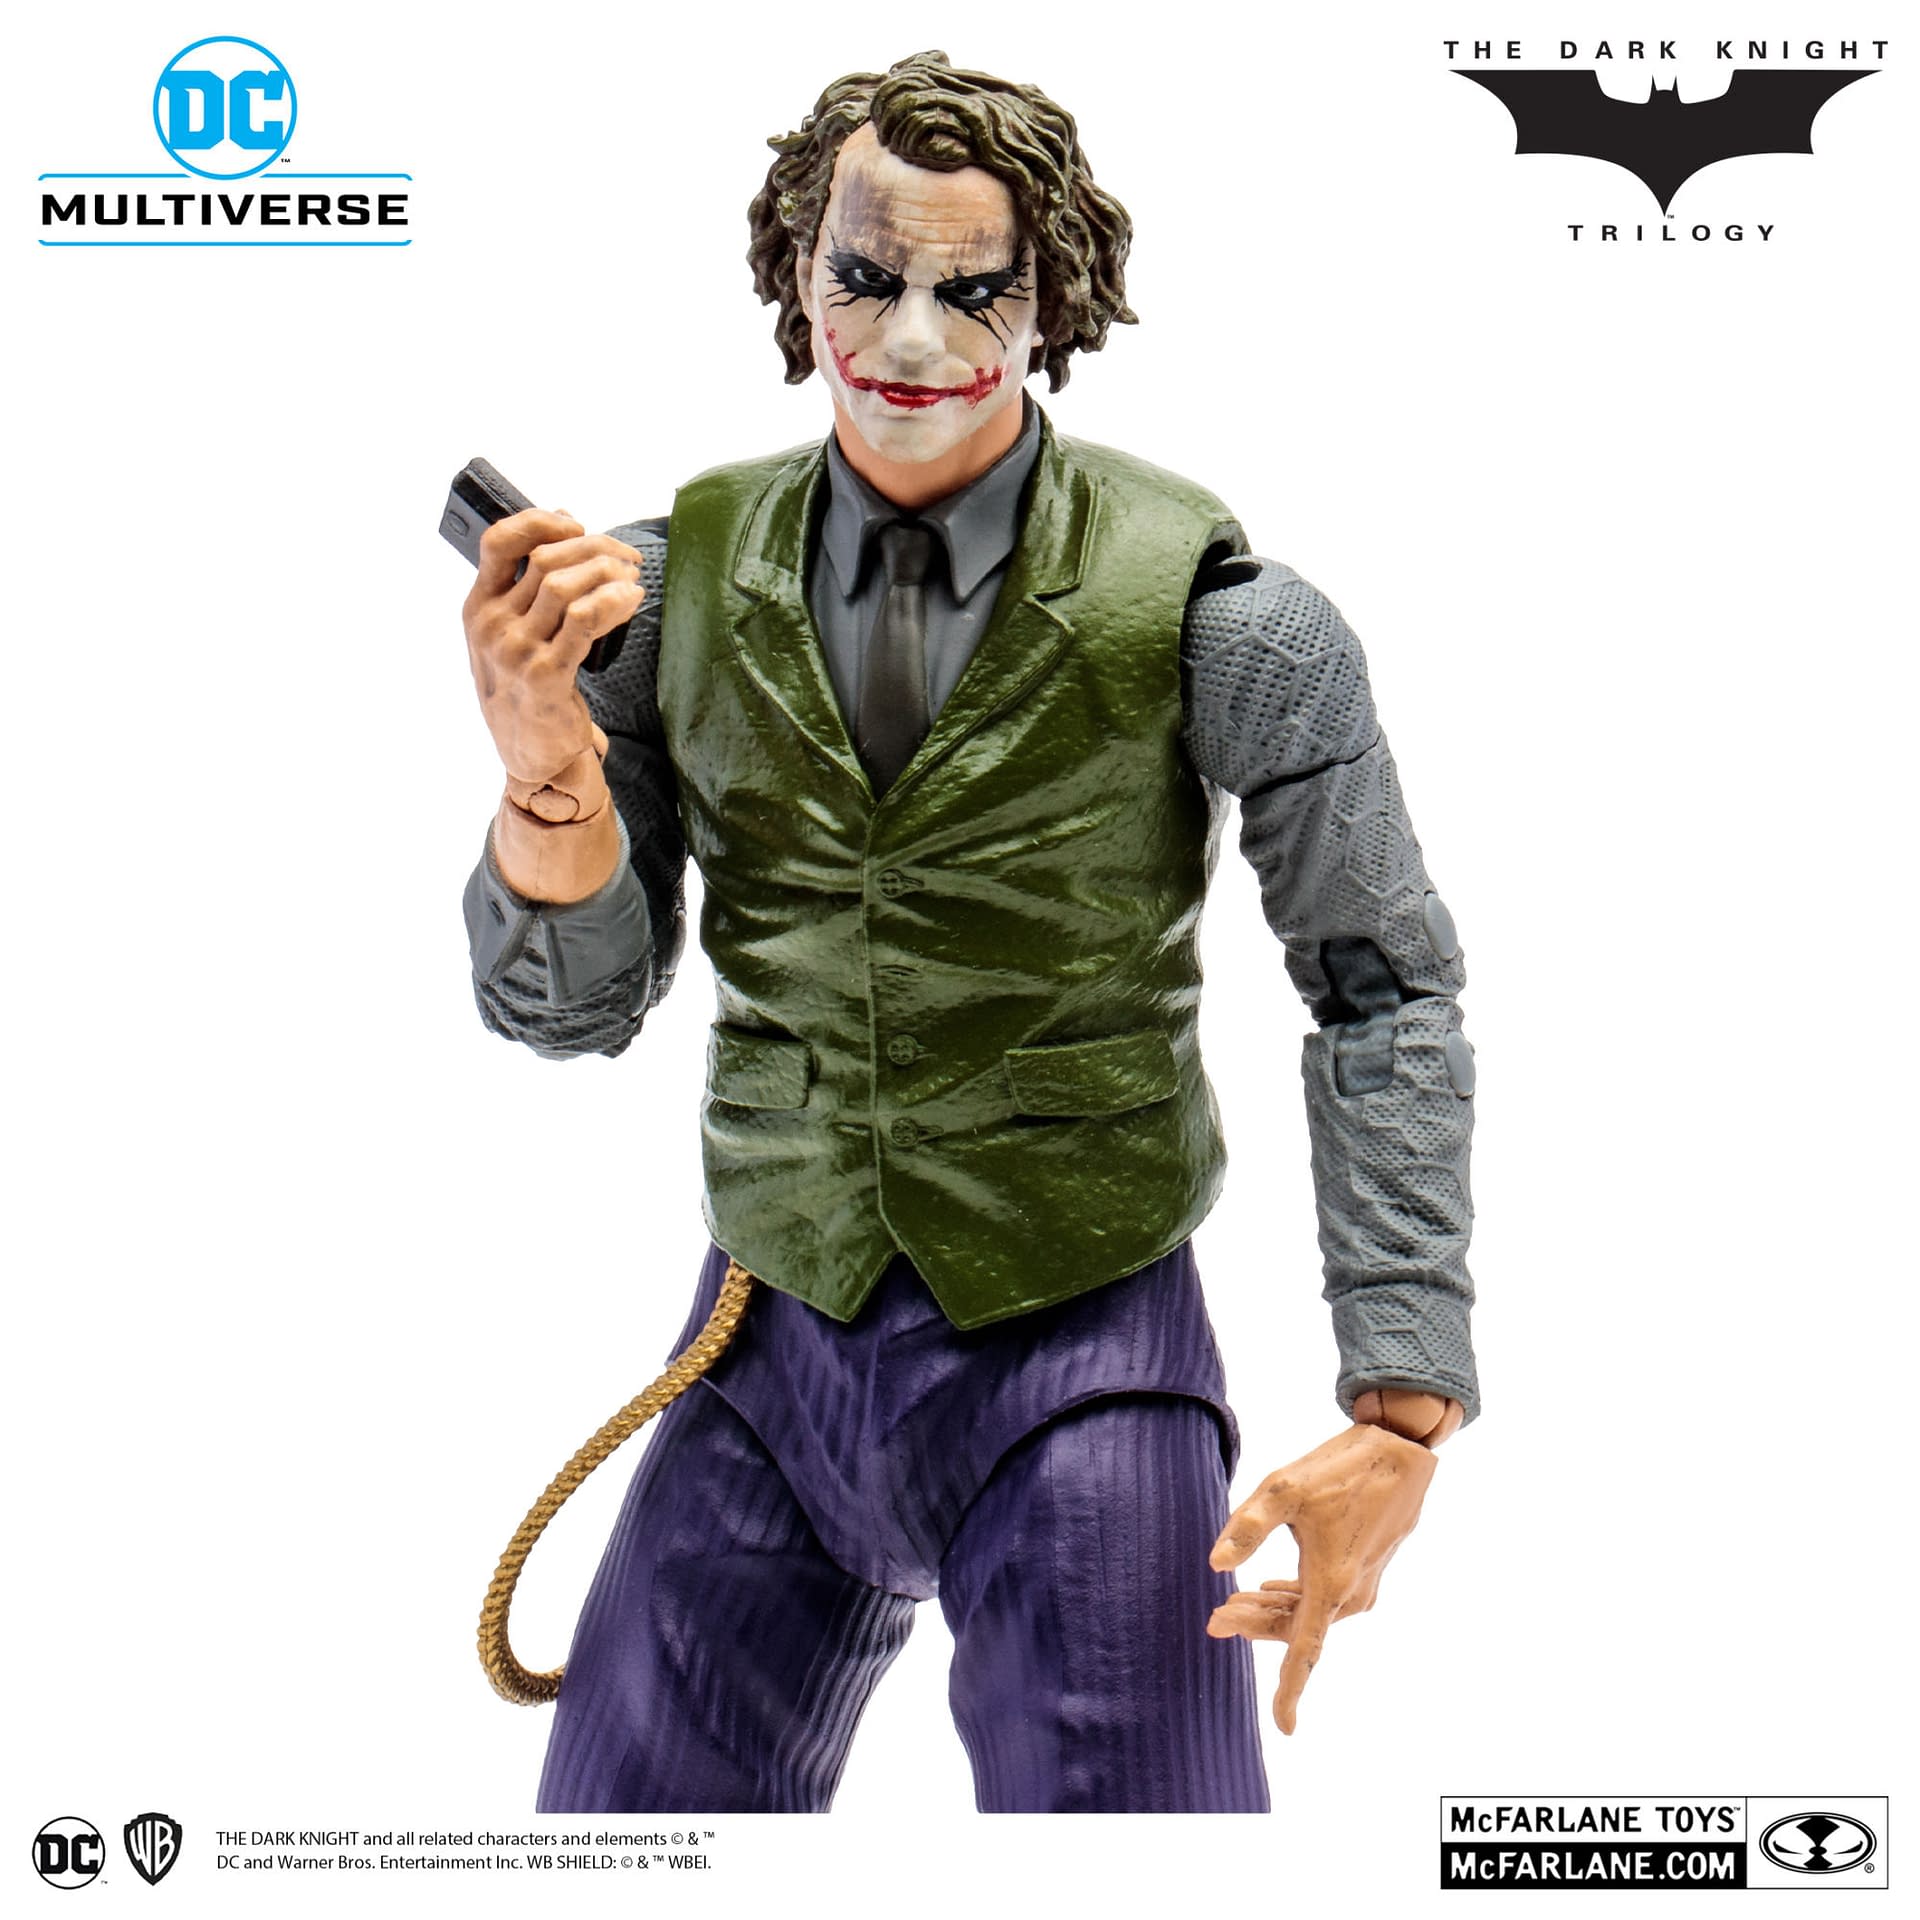 Joker Wants His One Phone Call with New Deluxe McFarlane Toys Figure